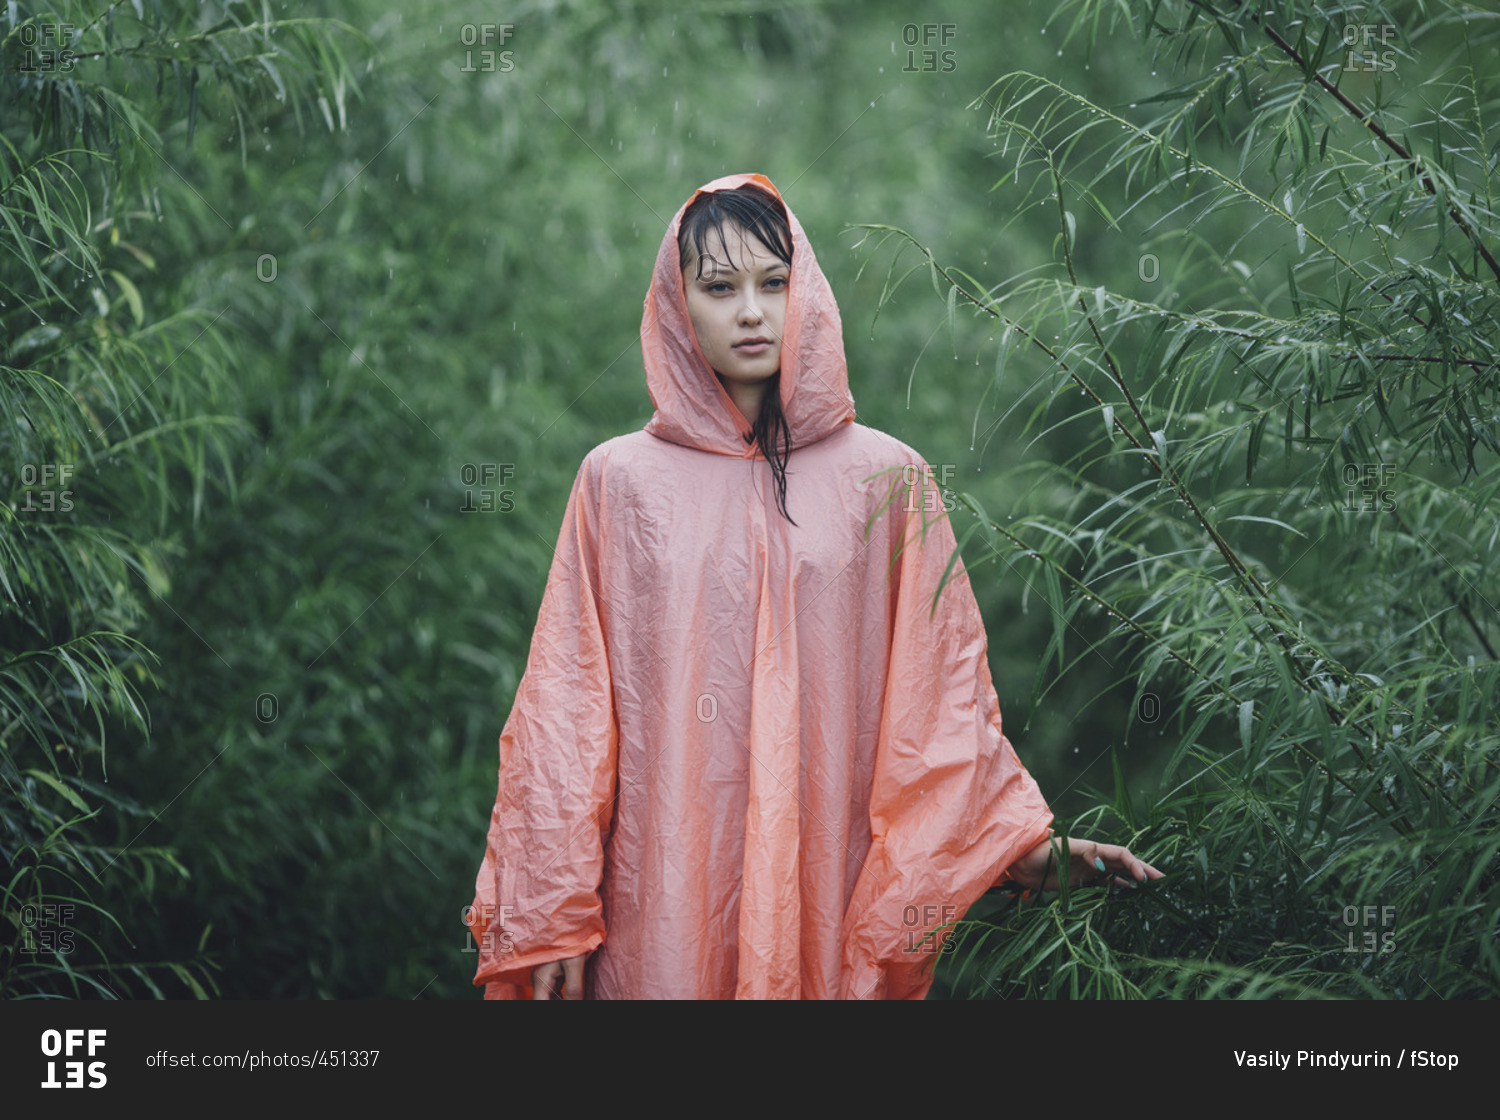 Young woman wearing raincoat standing amidst plants during rainy season